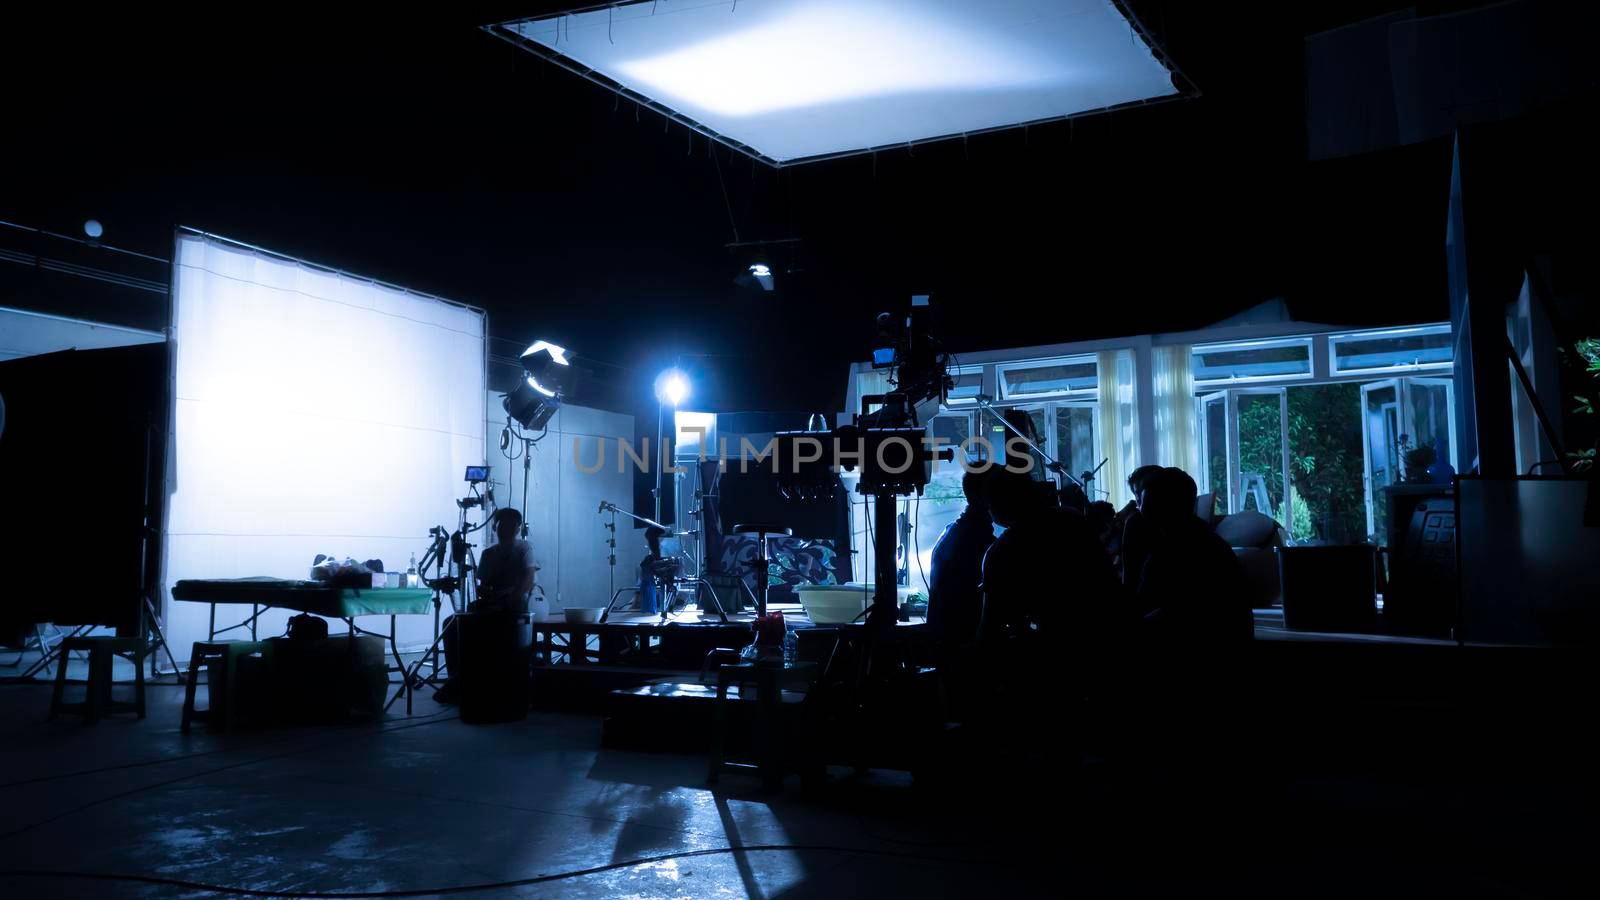 Silhouette images of video production behind the scenes or b-roll  by gnepphoto